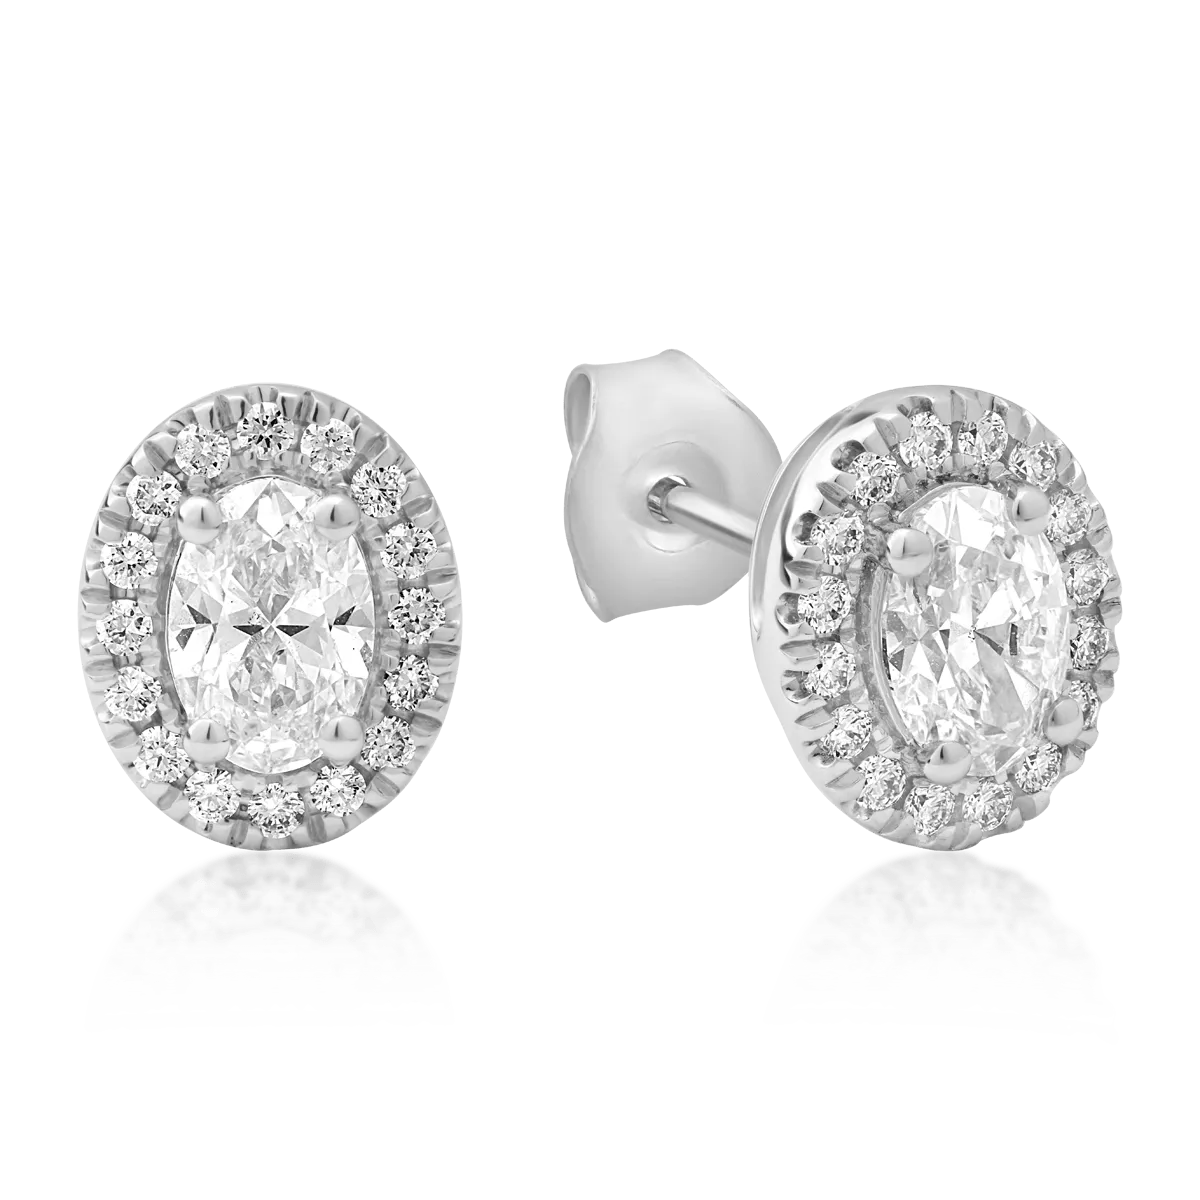 18K white gold earrings with 0.8ct diamonds and 0.189ct diamonds